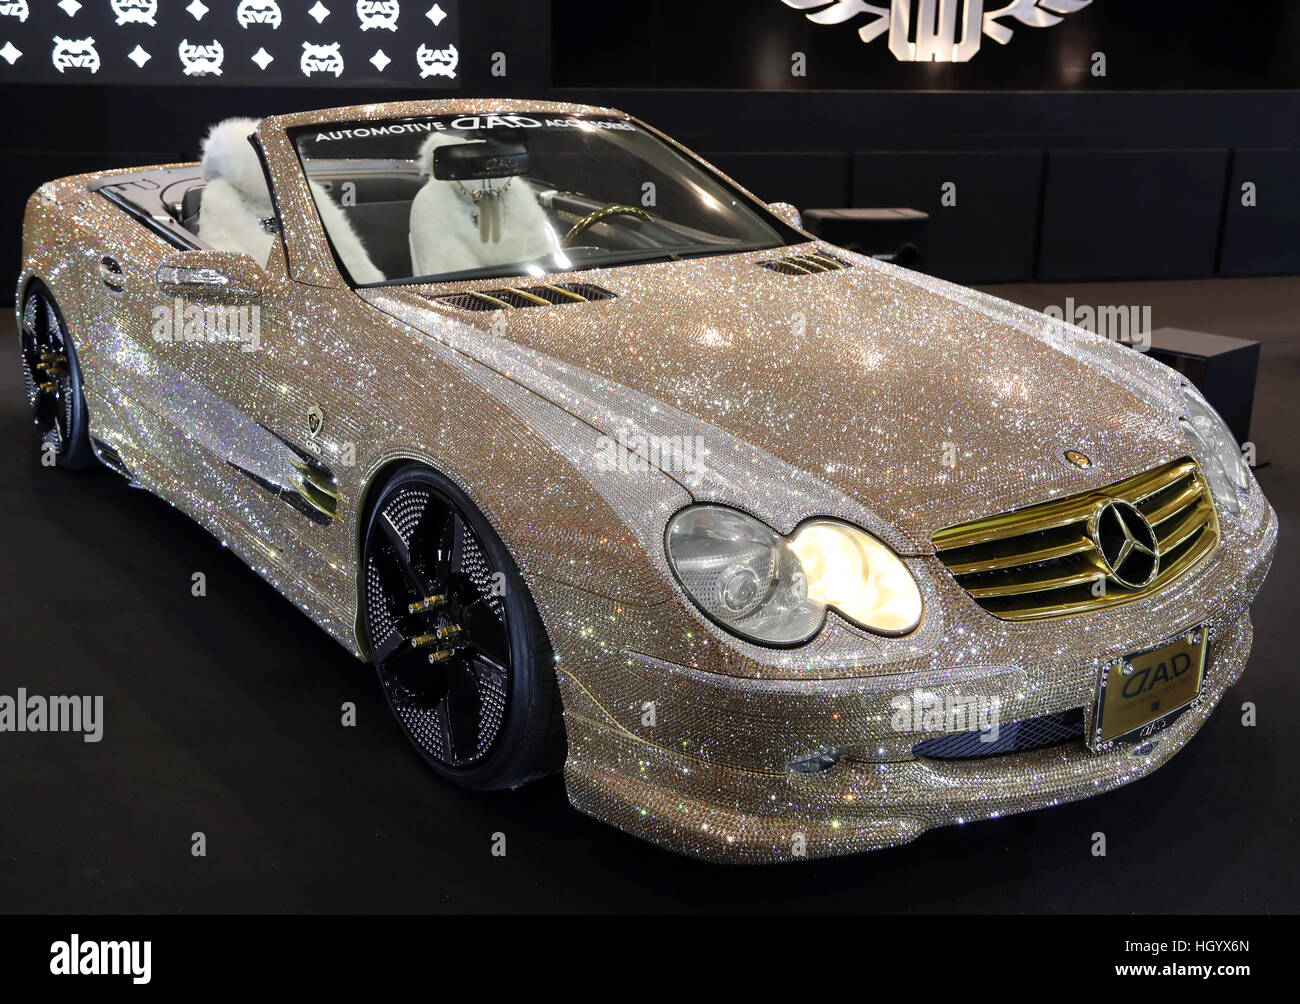 Chiba, Japan. 13th Jan, 2017. A Mercedes vehicle decorated with Swarovski crystals is displayed at the Tokyo Auto Salon 2017 in Chiba, suburban Tokyo on Friday, January 13, 2017. More than 400 automakers and auto parts makers exhibit their latest products at a three-day custom cars and racing cars exhibition. © Yoshio Tsunoda/AFLO/Alamy Live News Stock Photo